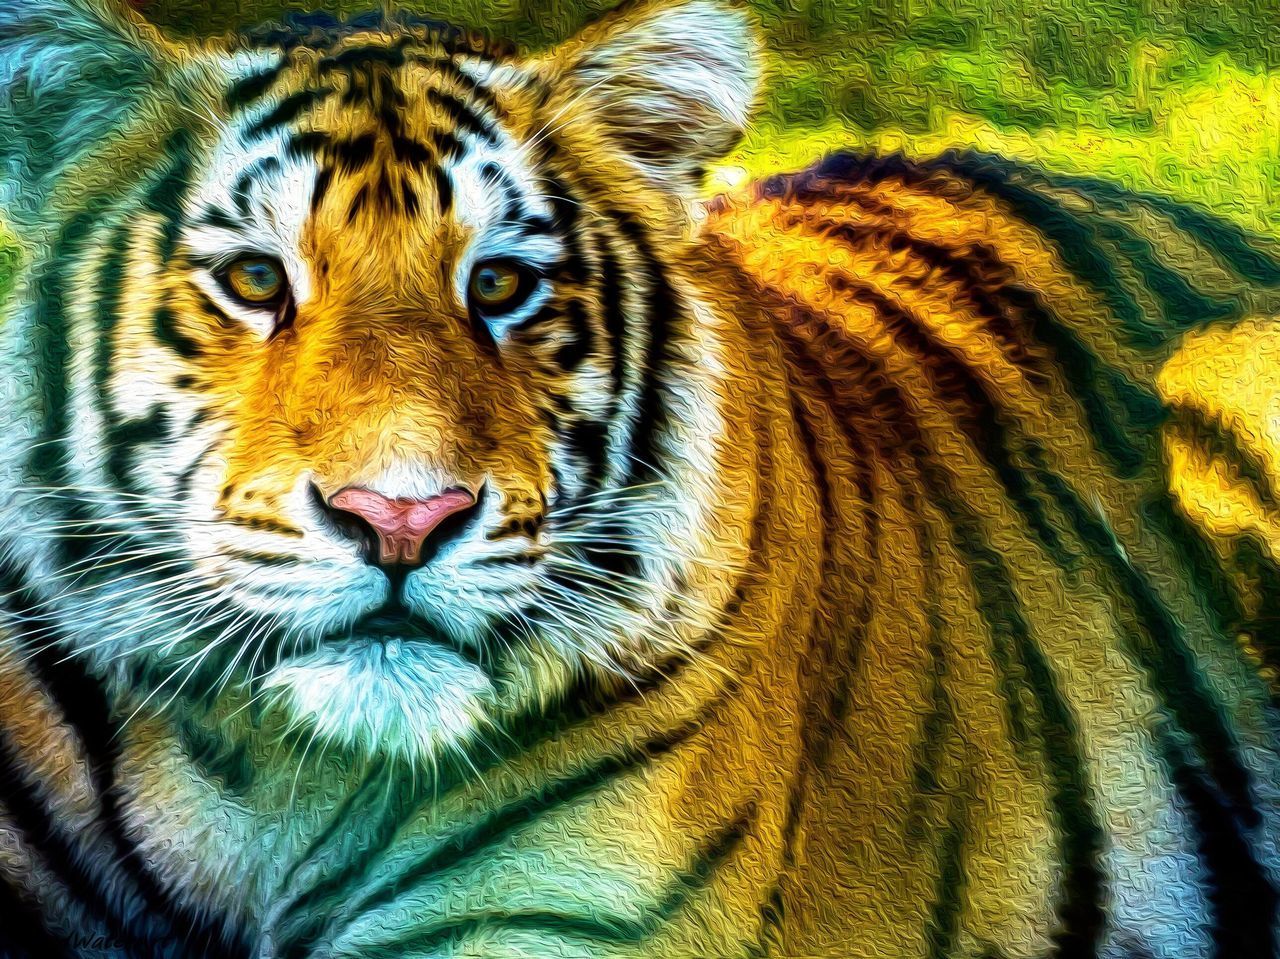 PORTRAIT OF TIGER OUTDOORS